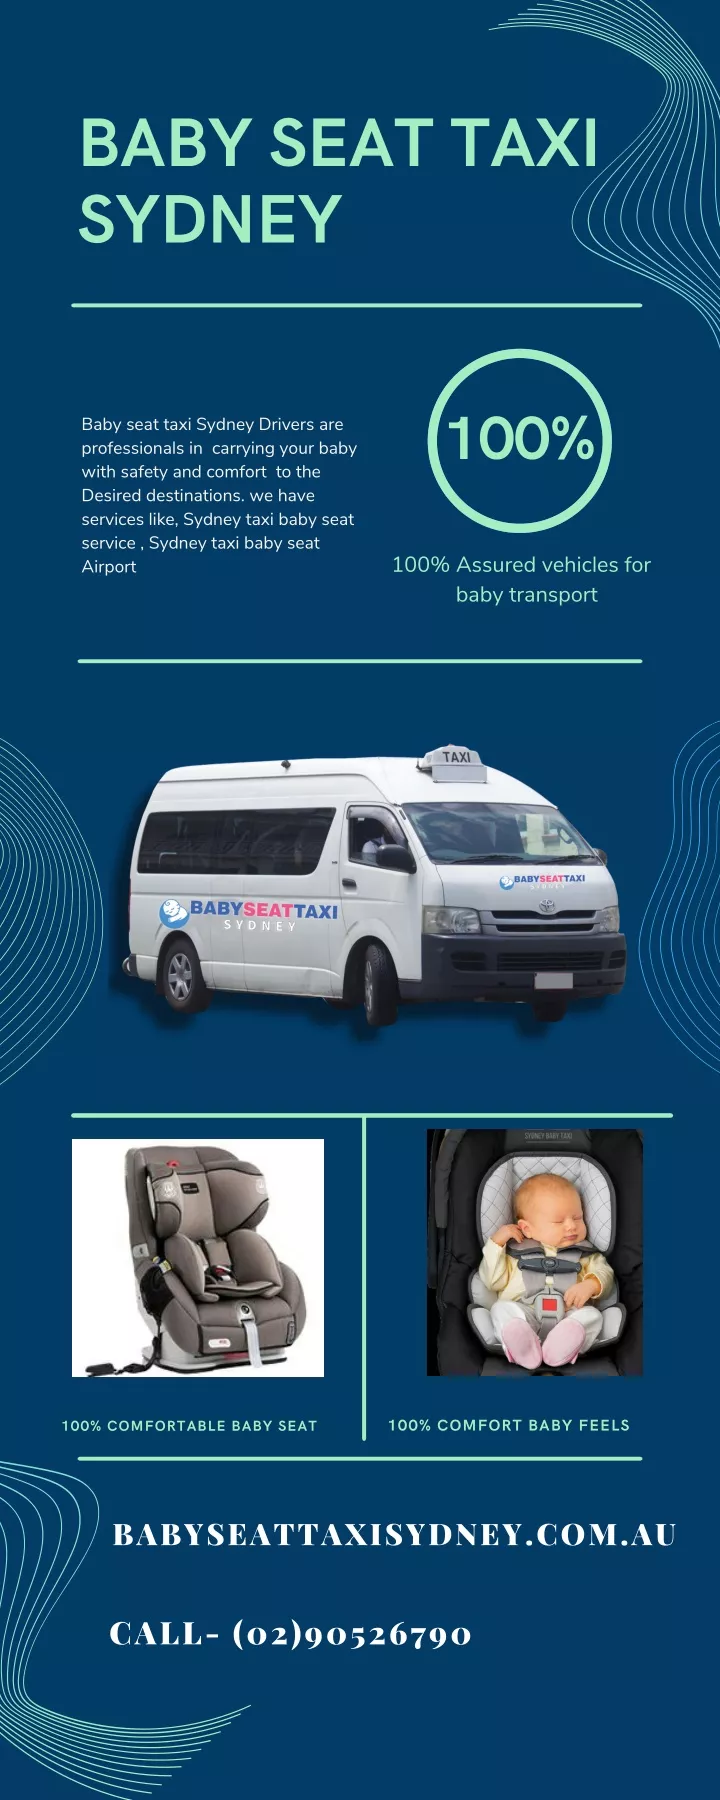 baby seat taxi sydney